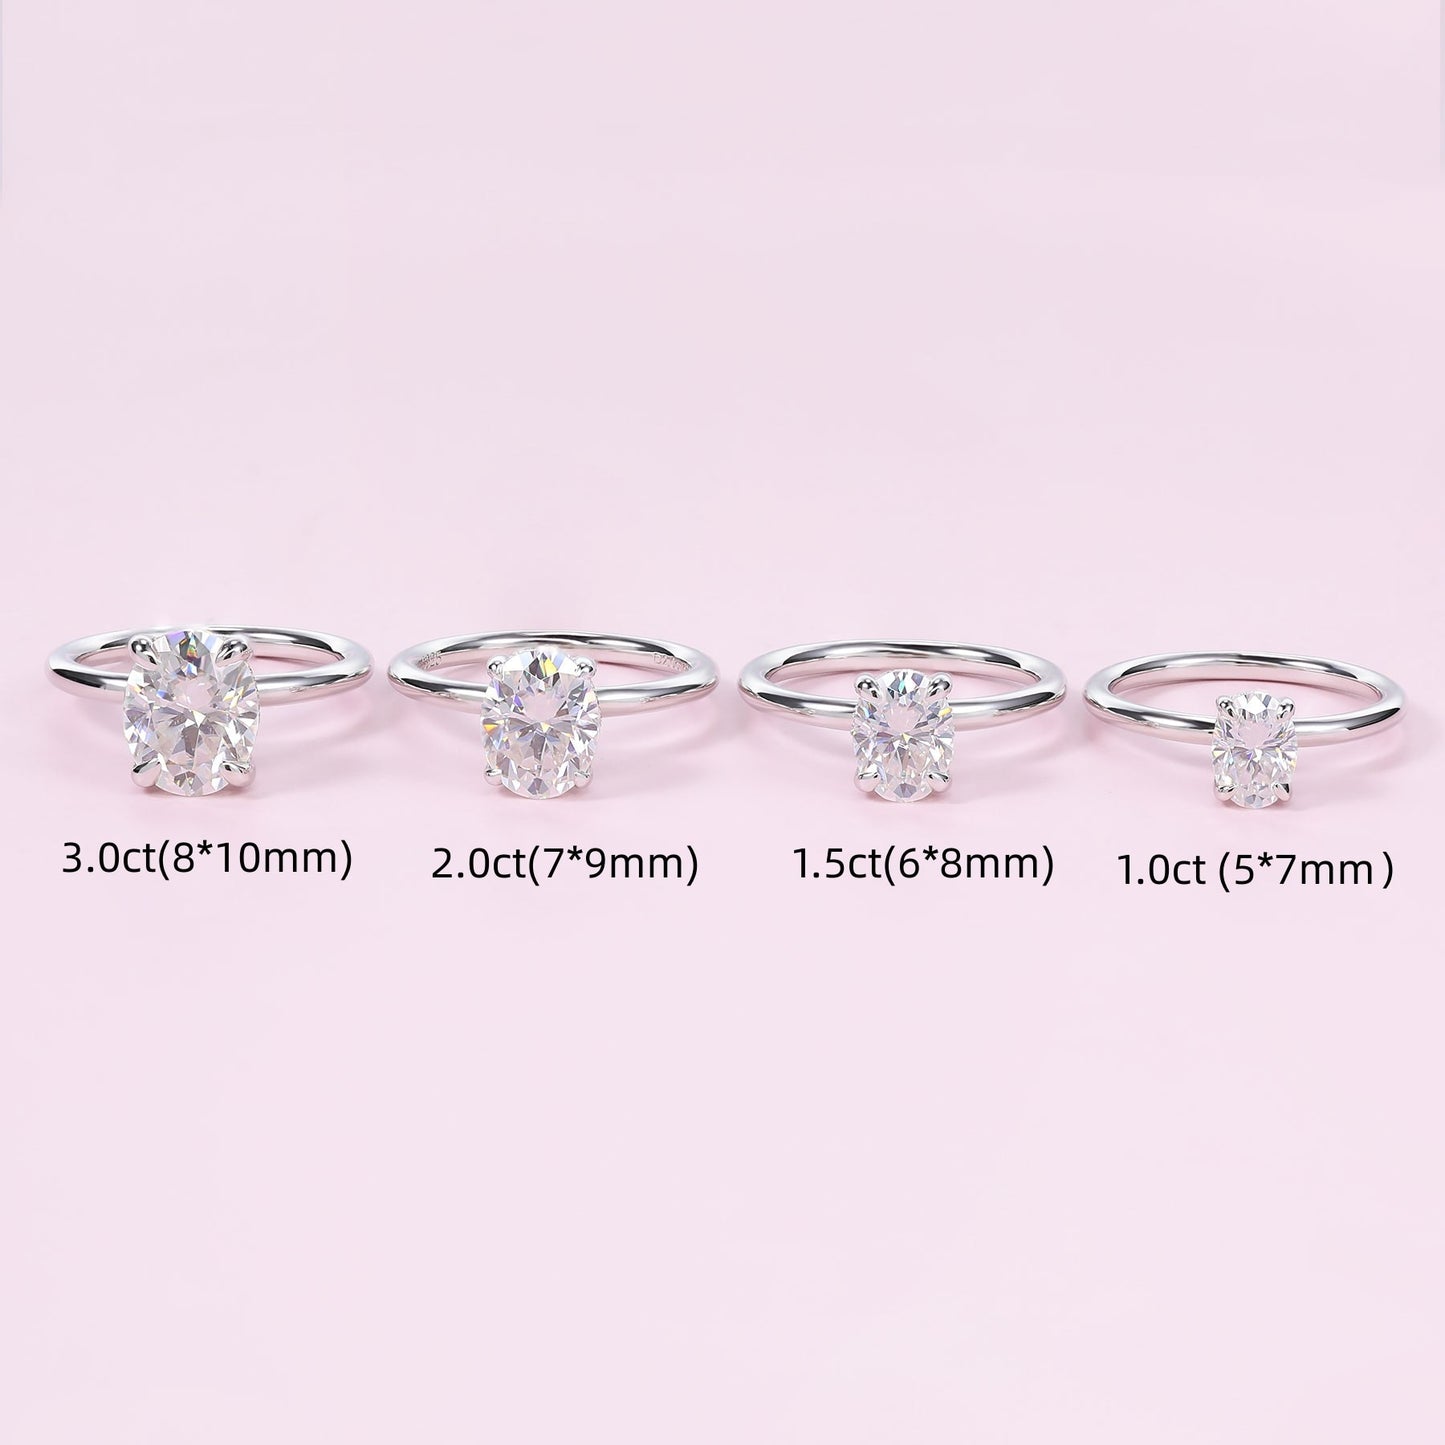 Four silver oval cut hidden halo engagement rings of varying stone sizes.